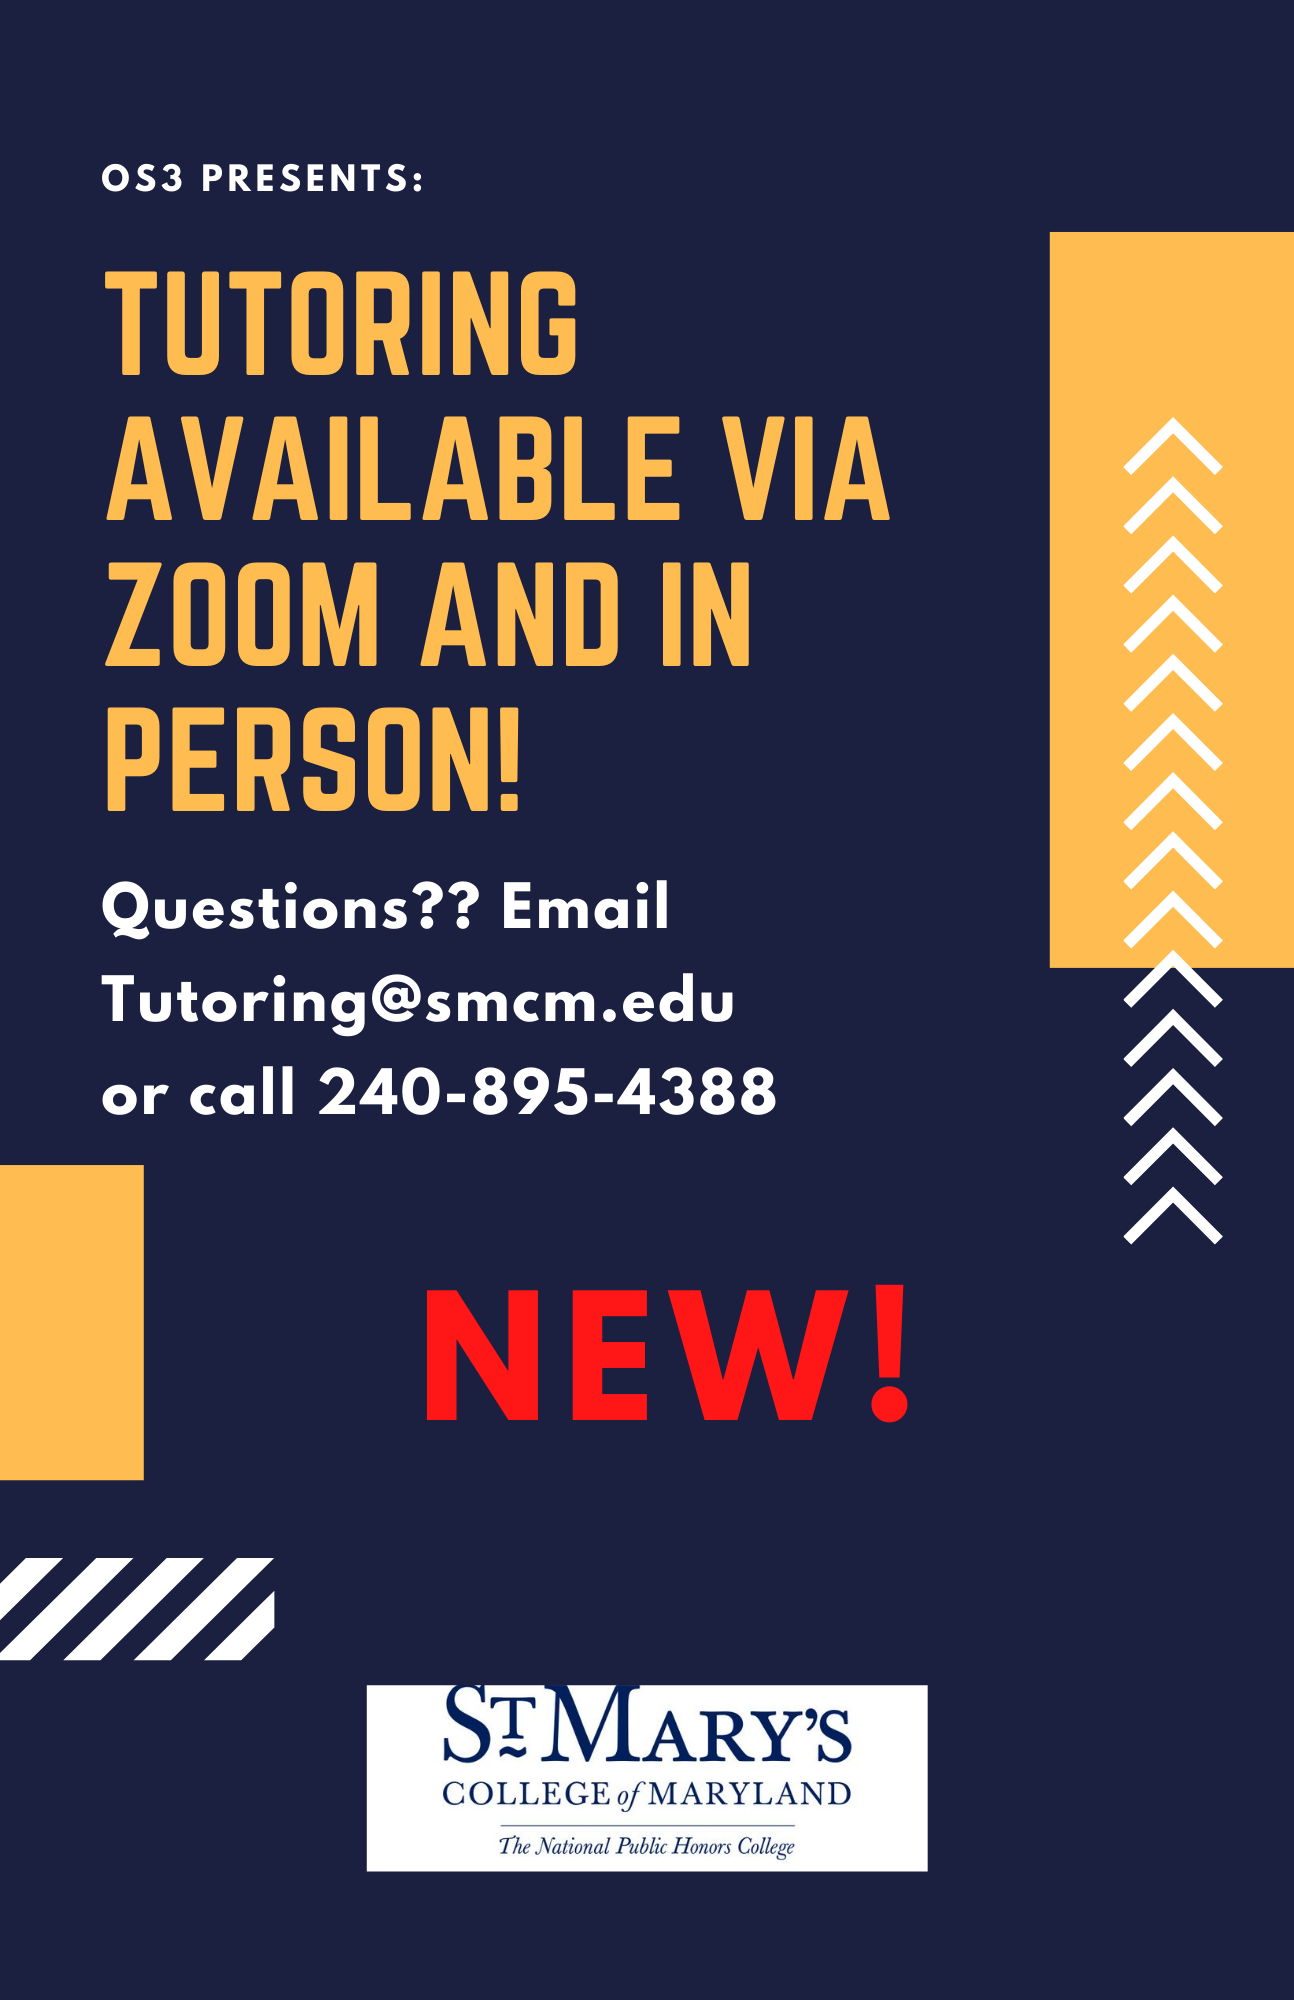 Tutoring Available via Zoom and In Person! Questions? Email tutoring@smcm.edu or call 240-895-4388